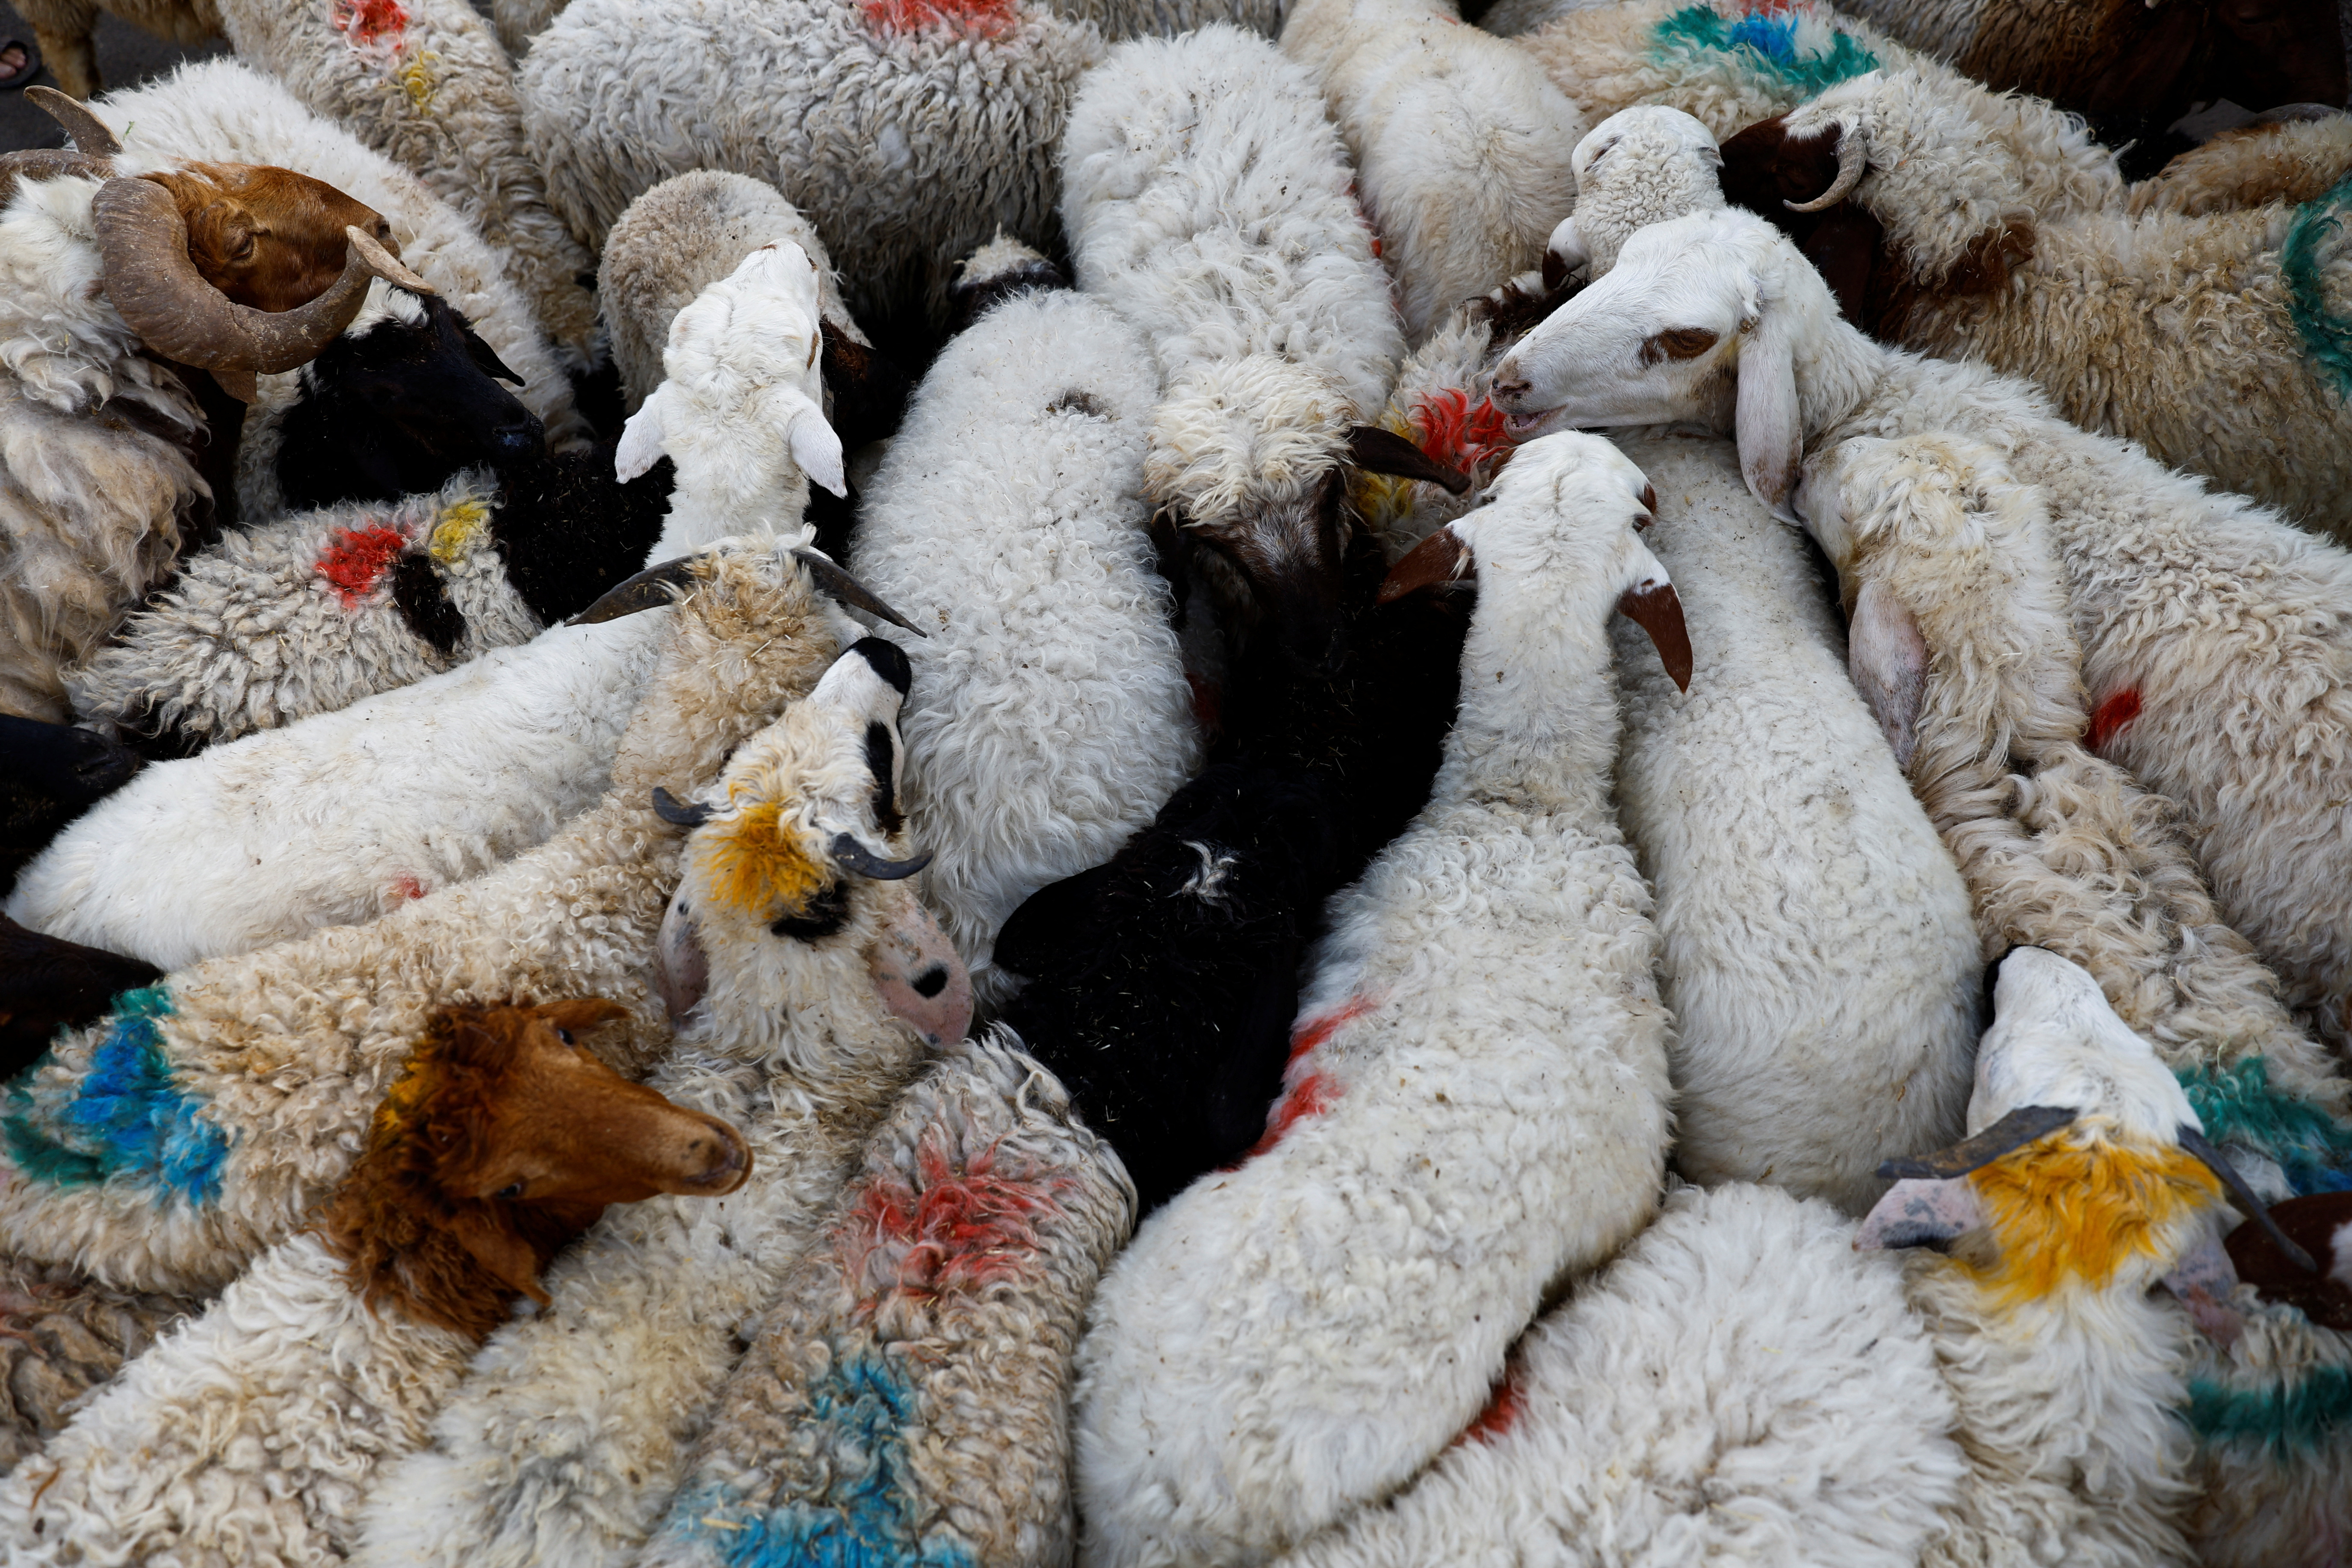 Sacrificial animals are displayed at a livestock market ahead of the Eid al-Adha festival, in Baghdad